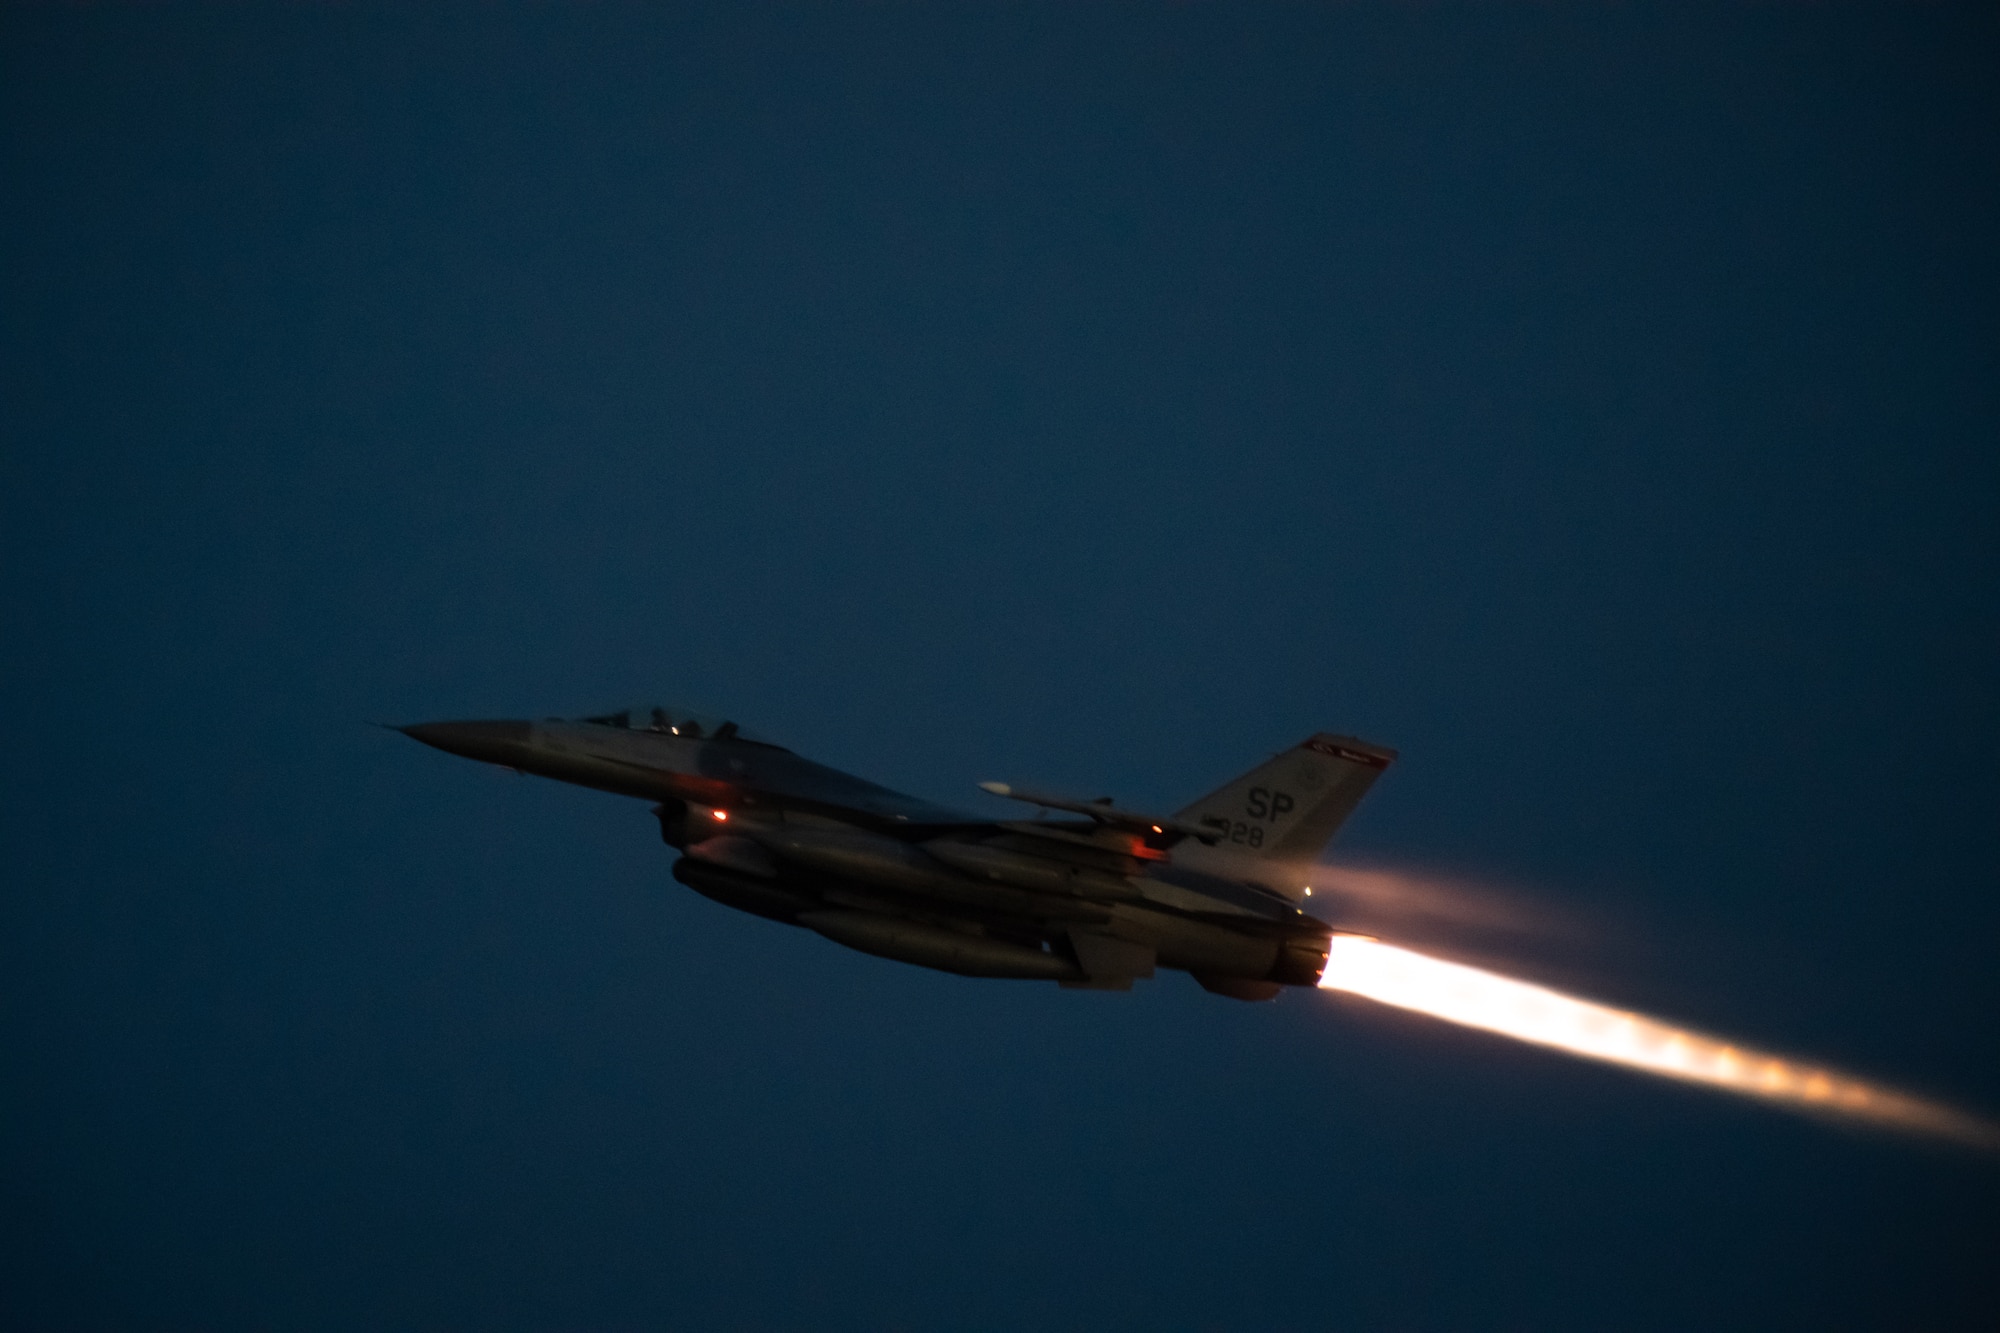 An F-16 flies across the night sky with its afterburner engaged.